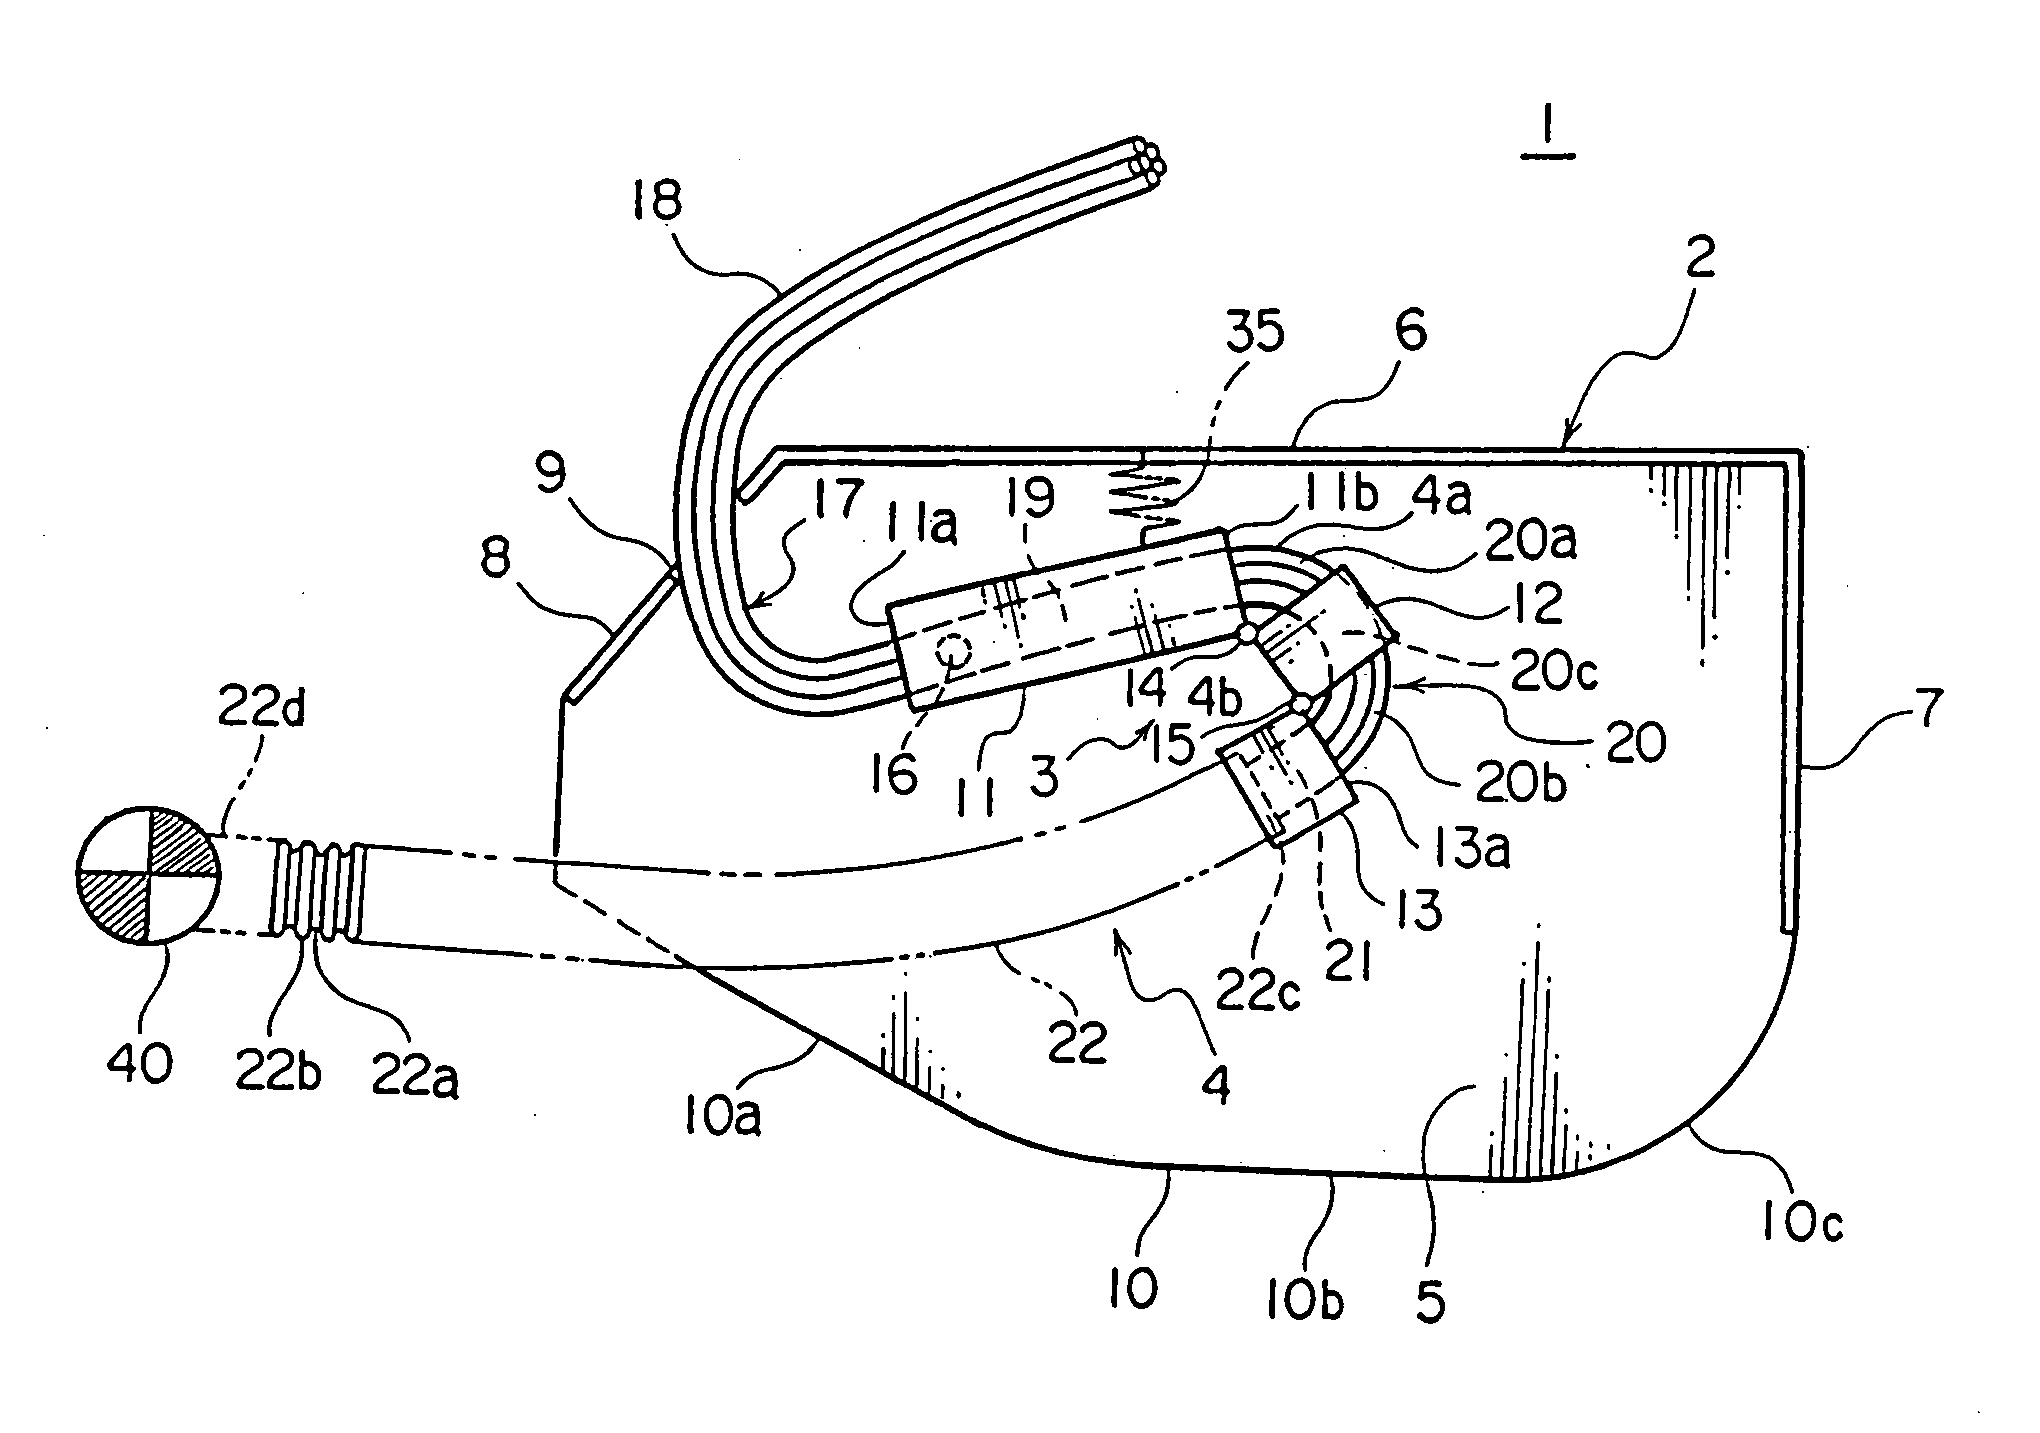 Apparatus for holding wire harness